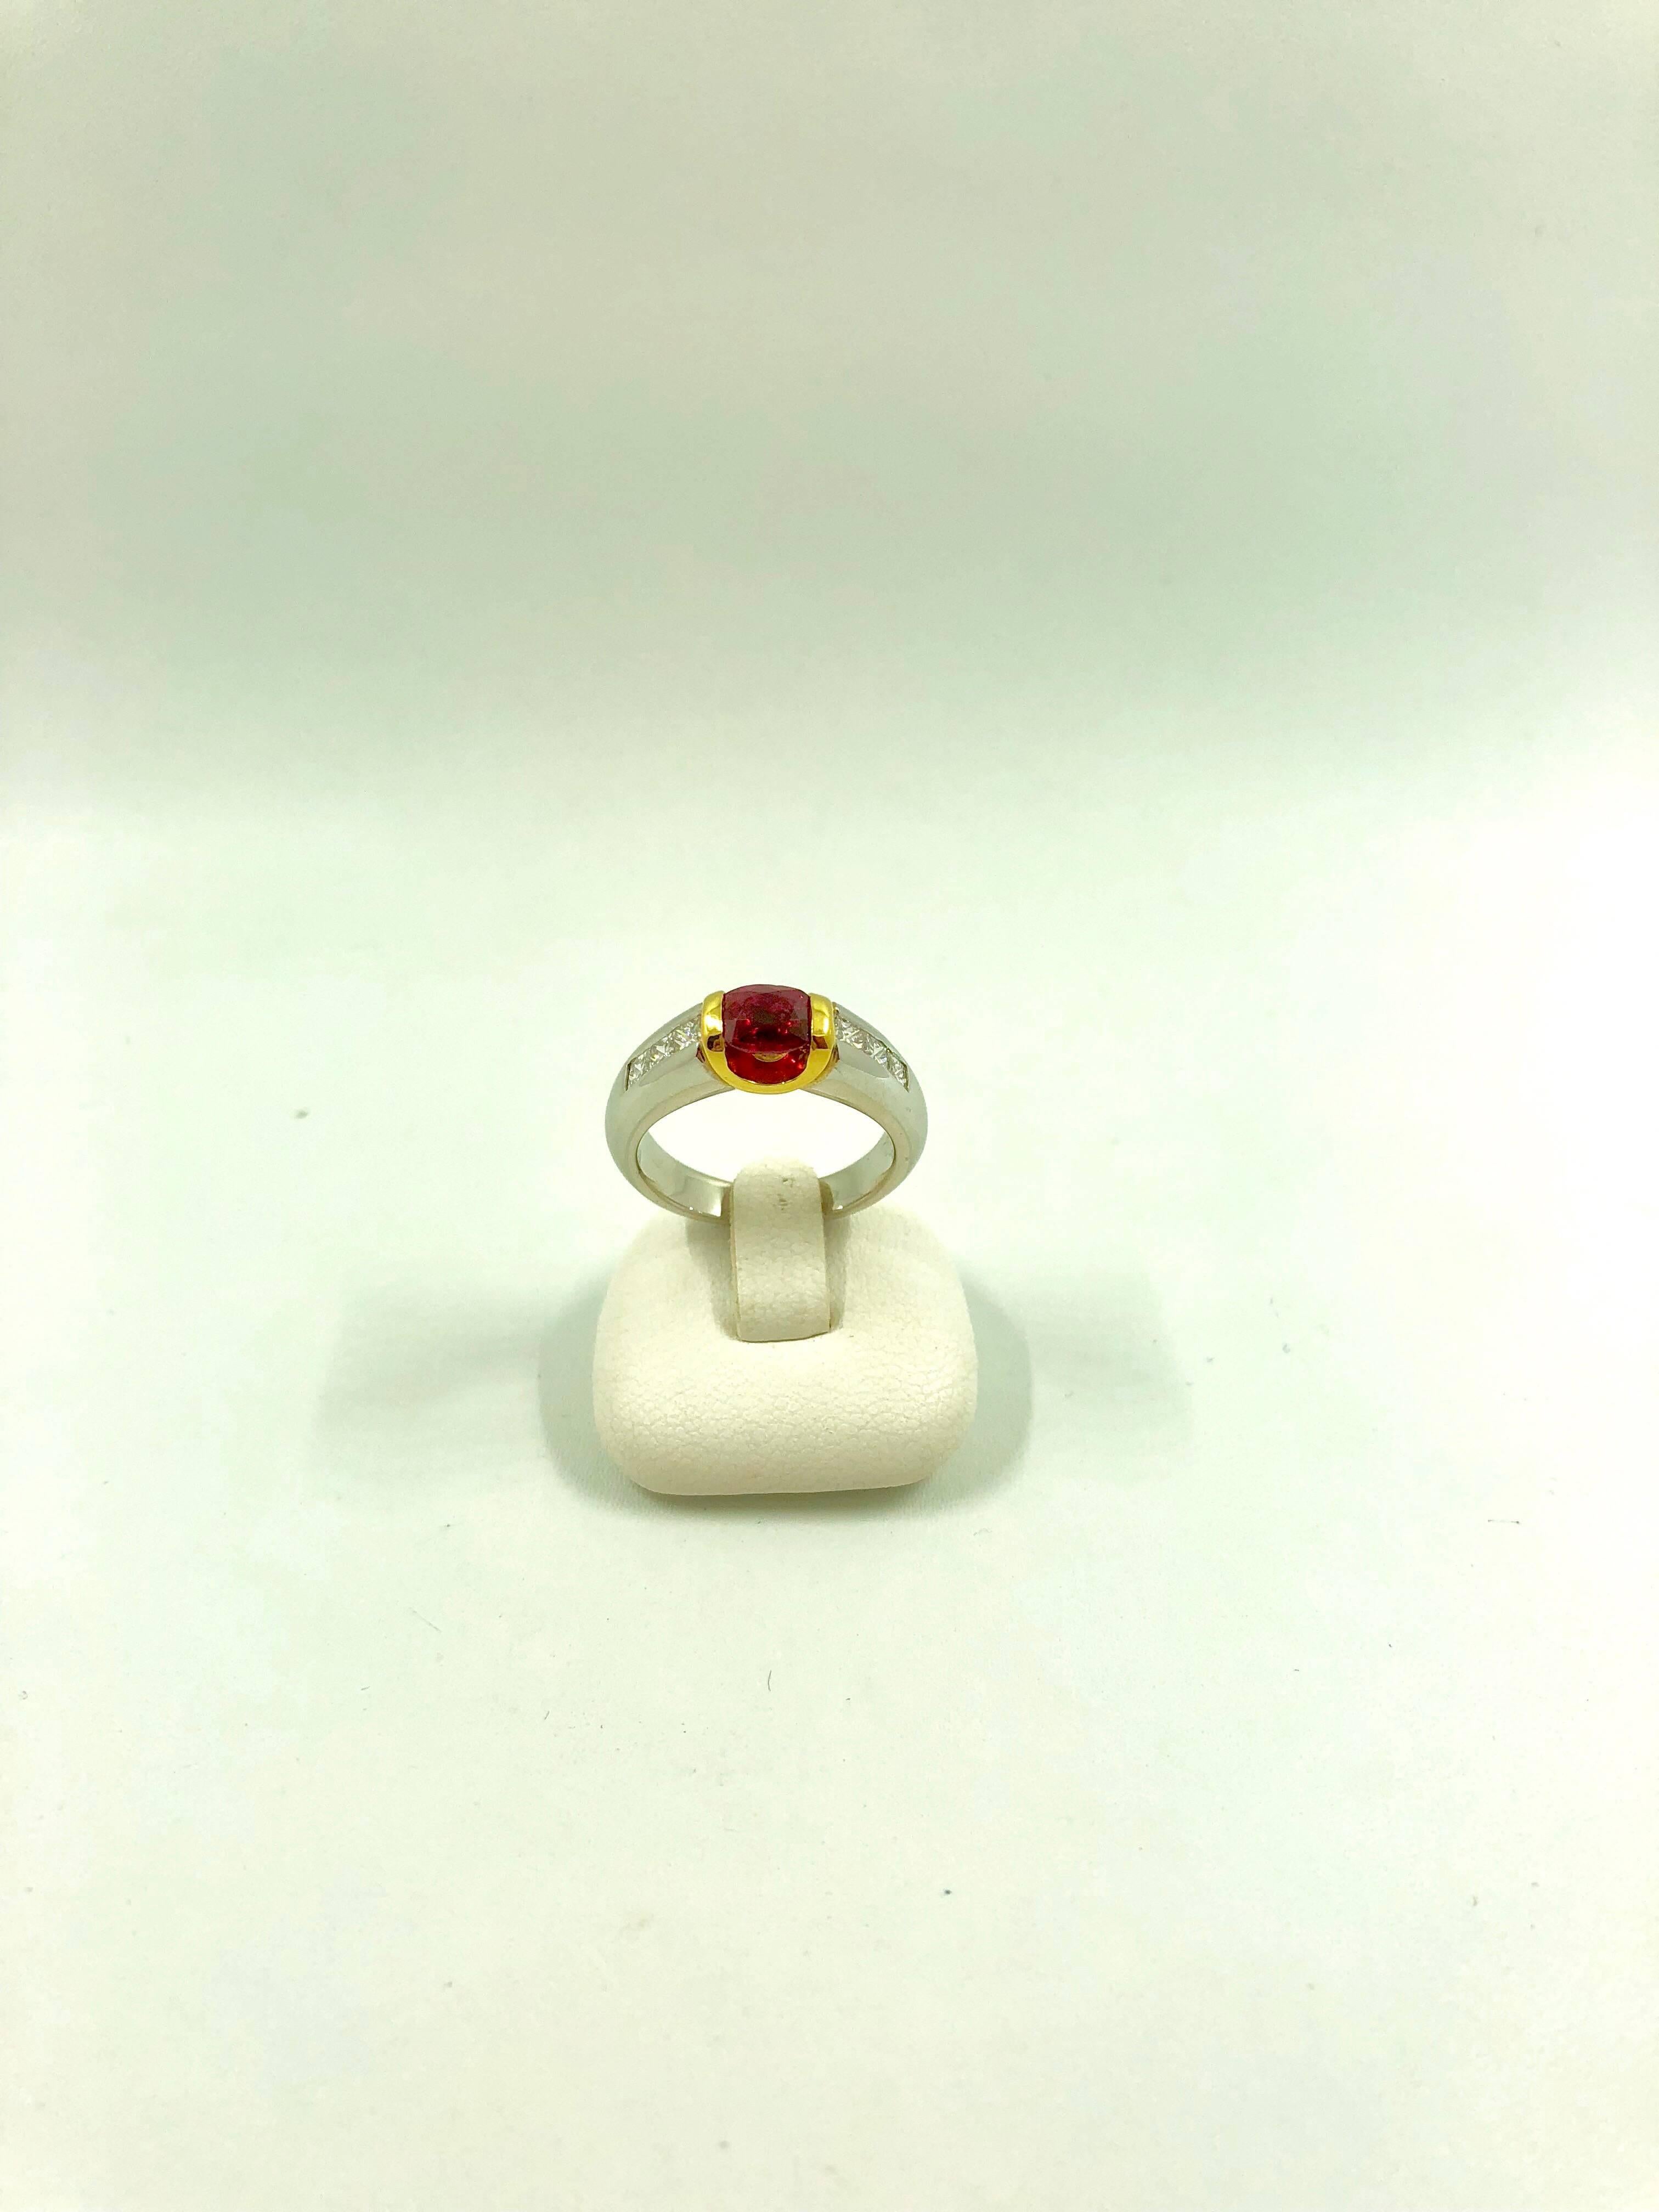 A white and gold ring set in the middle with a magnificent vivid red ruby, surrounded by three princess cut diamonds on each side.
the ring is a G.MINNER unique creation entirely handmade.
Ruby Weight: 1.08 carat
Diamonds Weight: 0.44 carat
Net